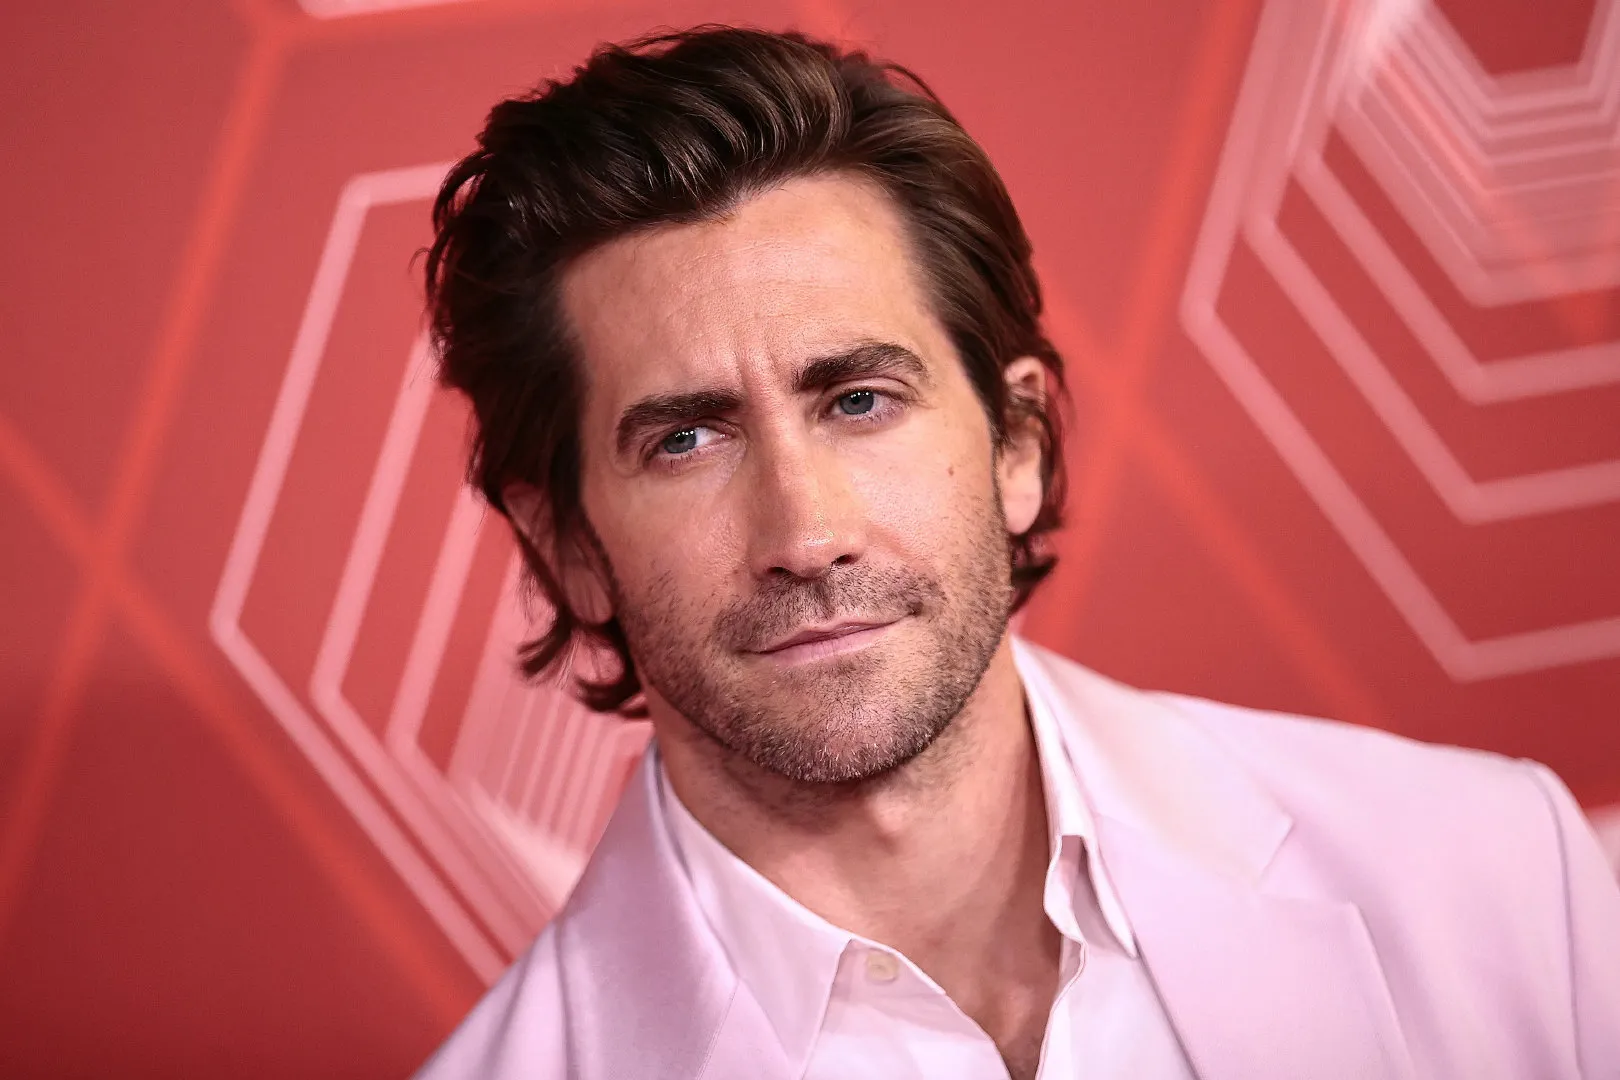 Jake Gyllenhaal to star in action thriller 'Road House‎' reboot, directed by Doug Liman | FMV6